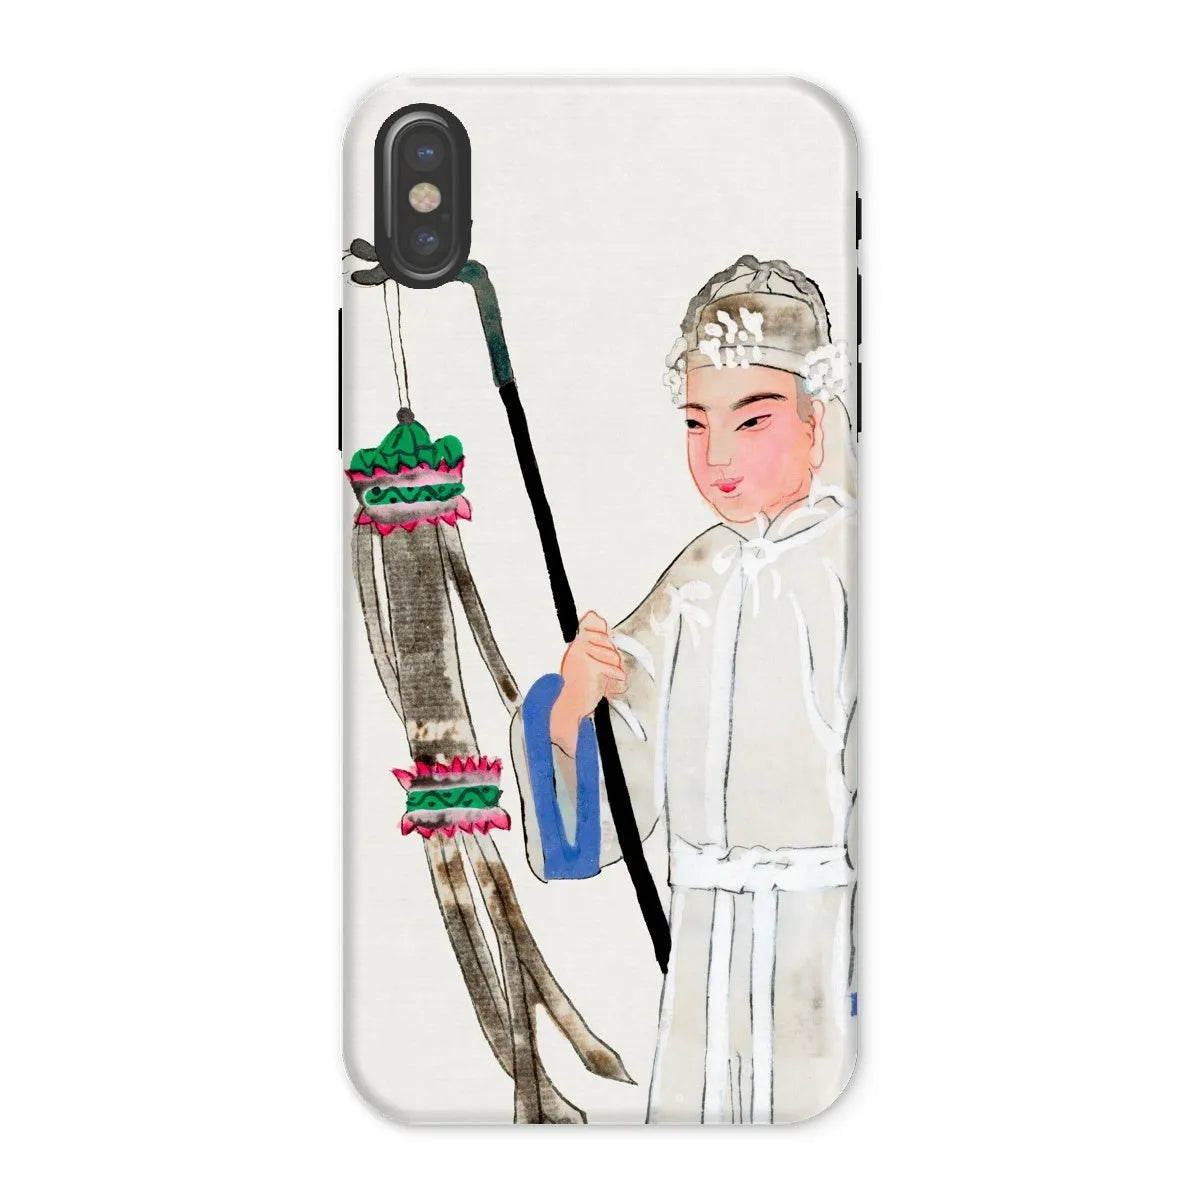 Man In Mourning - Chinese Historical Art Phone Case - Iphone x / Matte - Mobile Phone Cases - Aesthetic Art